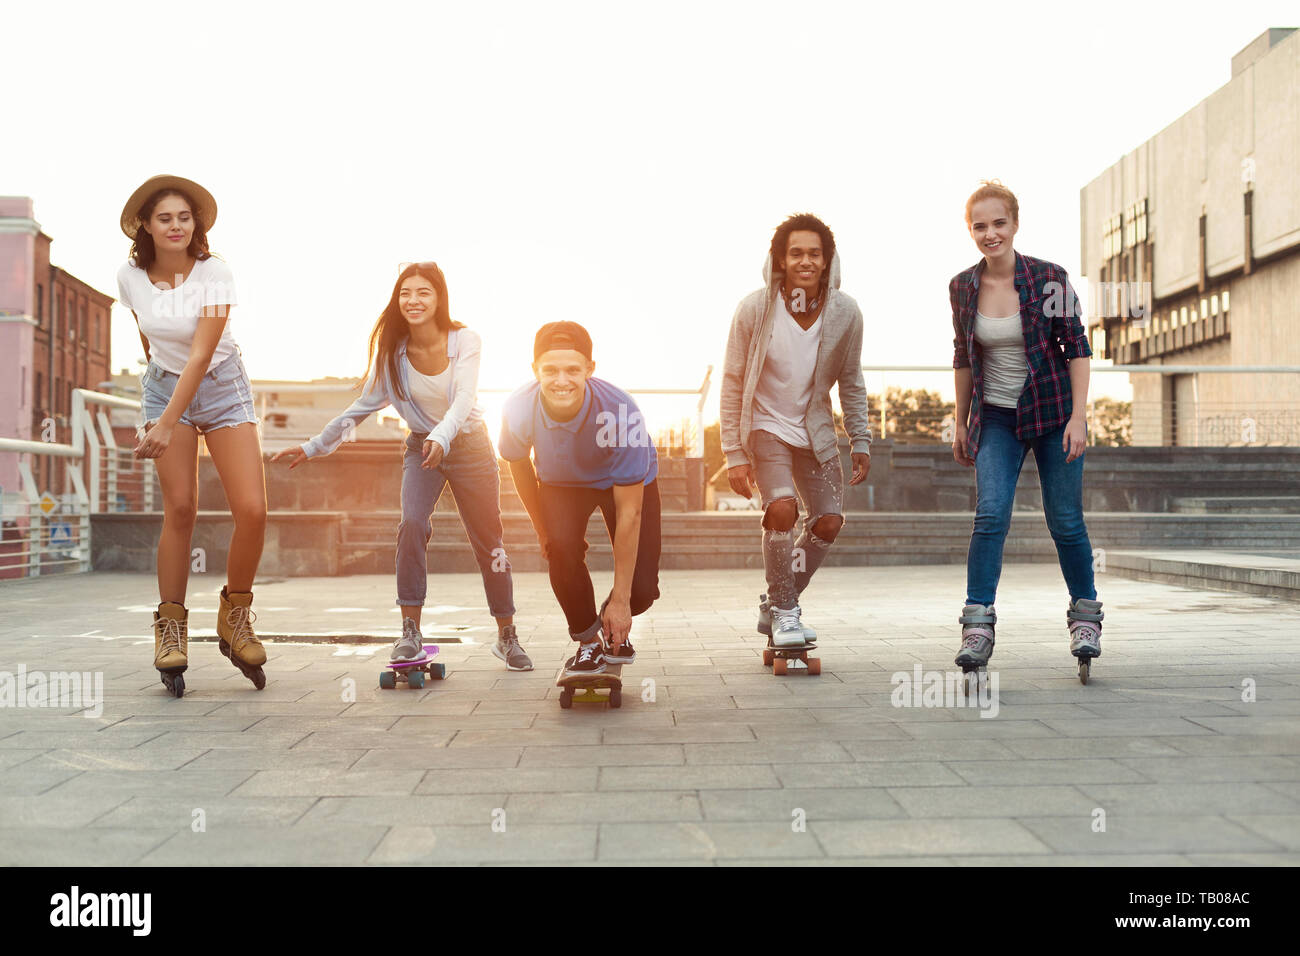 Group of smiling teenagers with roller skates and skateboard Stock Photo